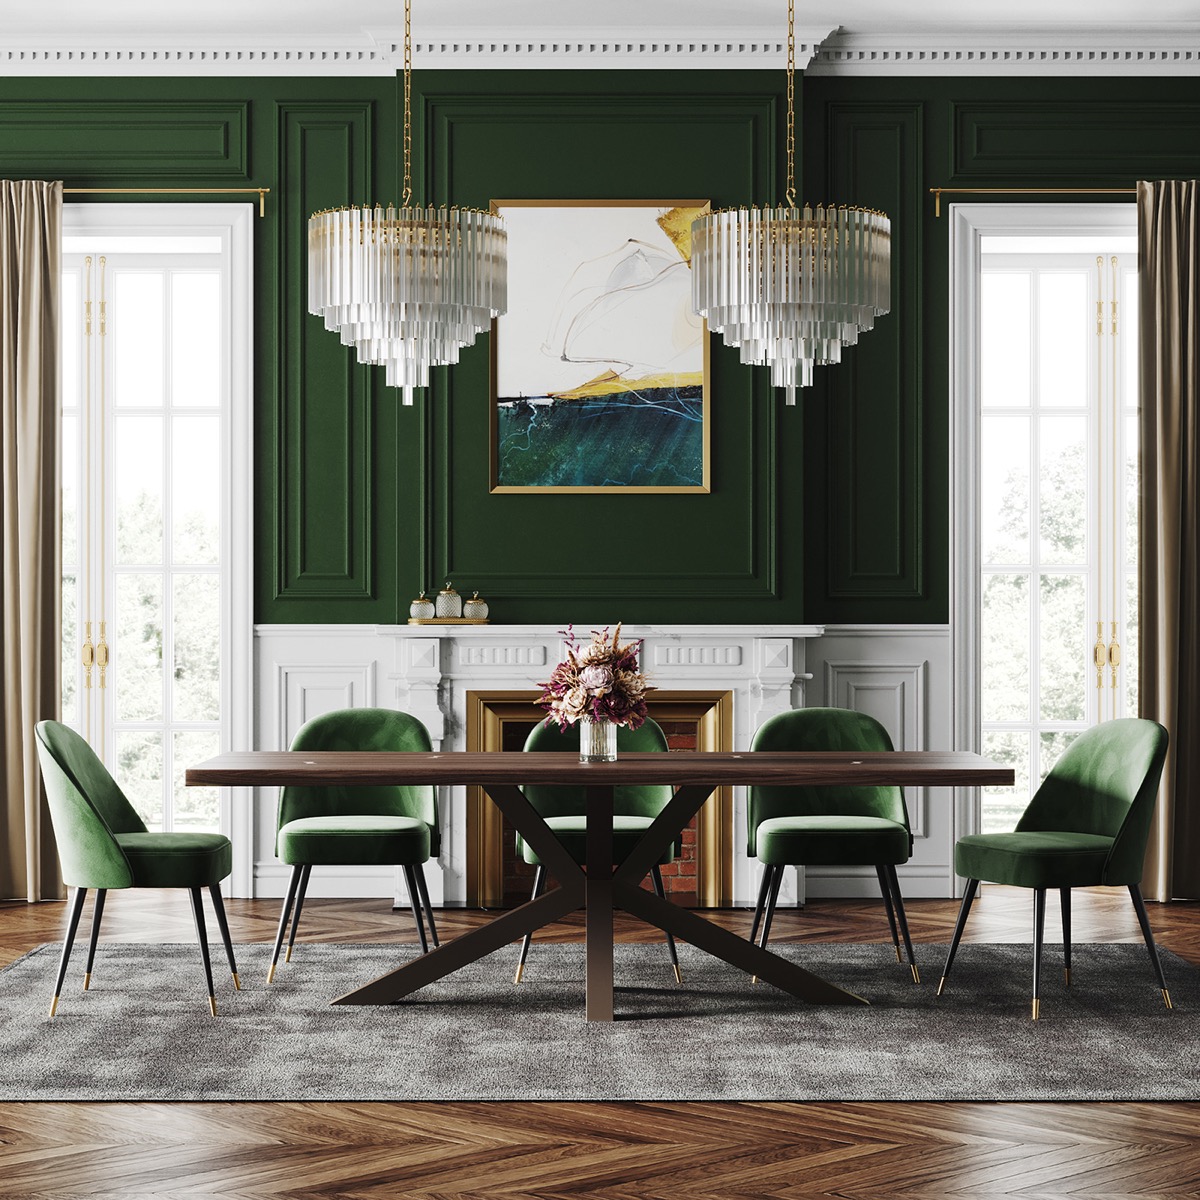  The Green Dining Room 